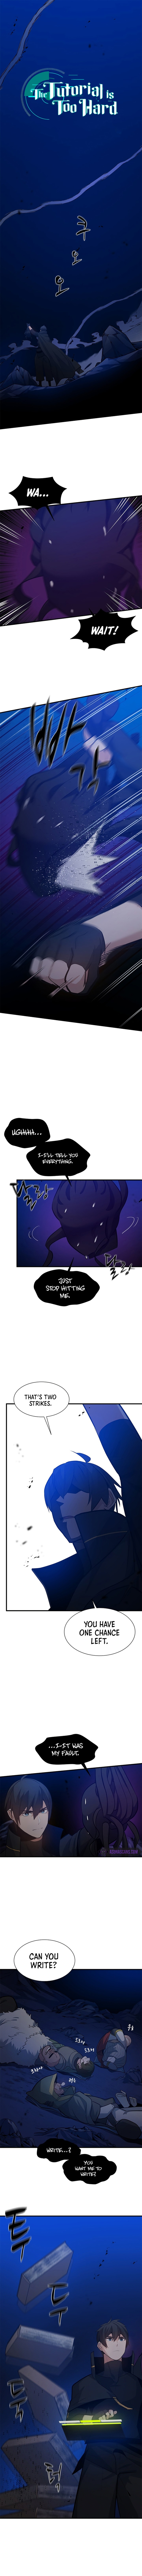 The Tutorial Is Too Hard Chapter 102 Page 1